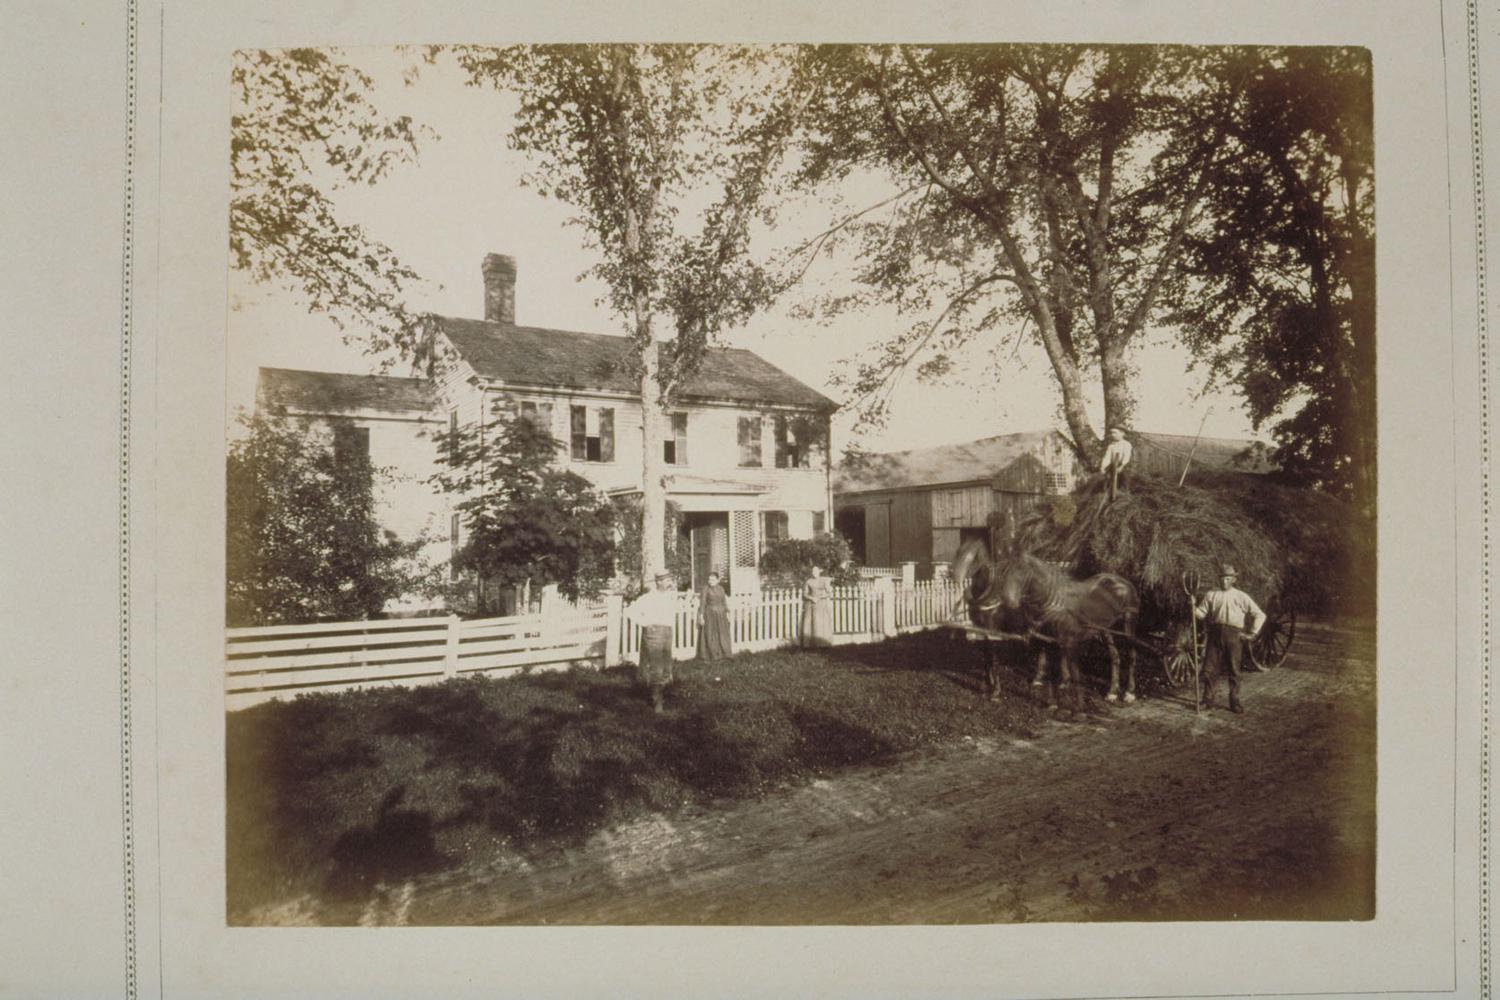 Connecticut Historical Society collection, 2000.191.146  © 2001 The Connecticut Historical Soci ...